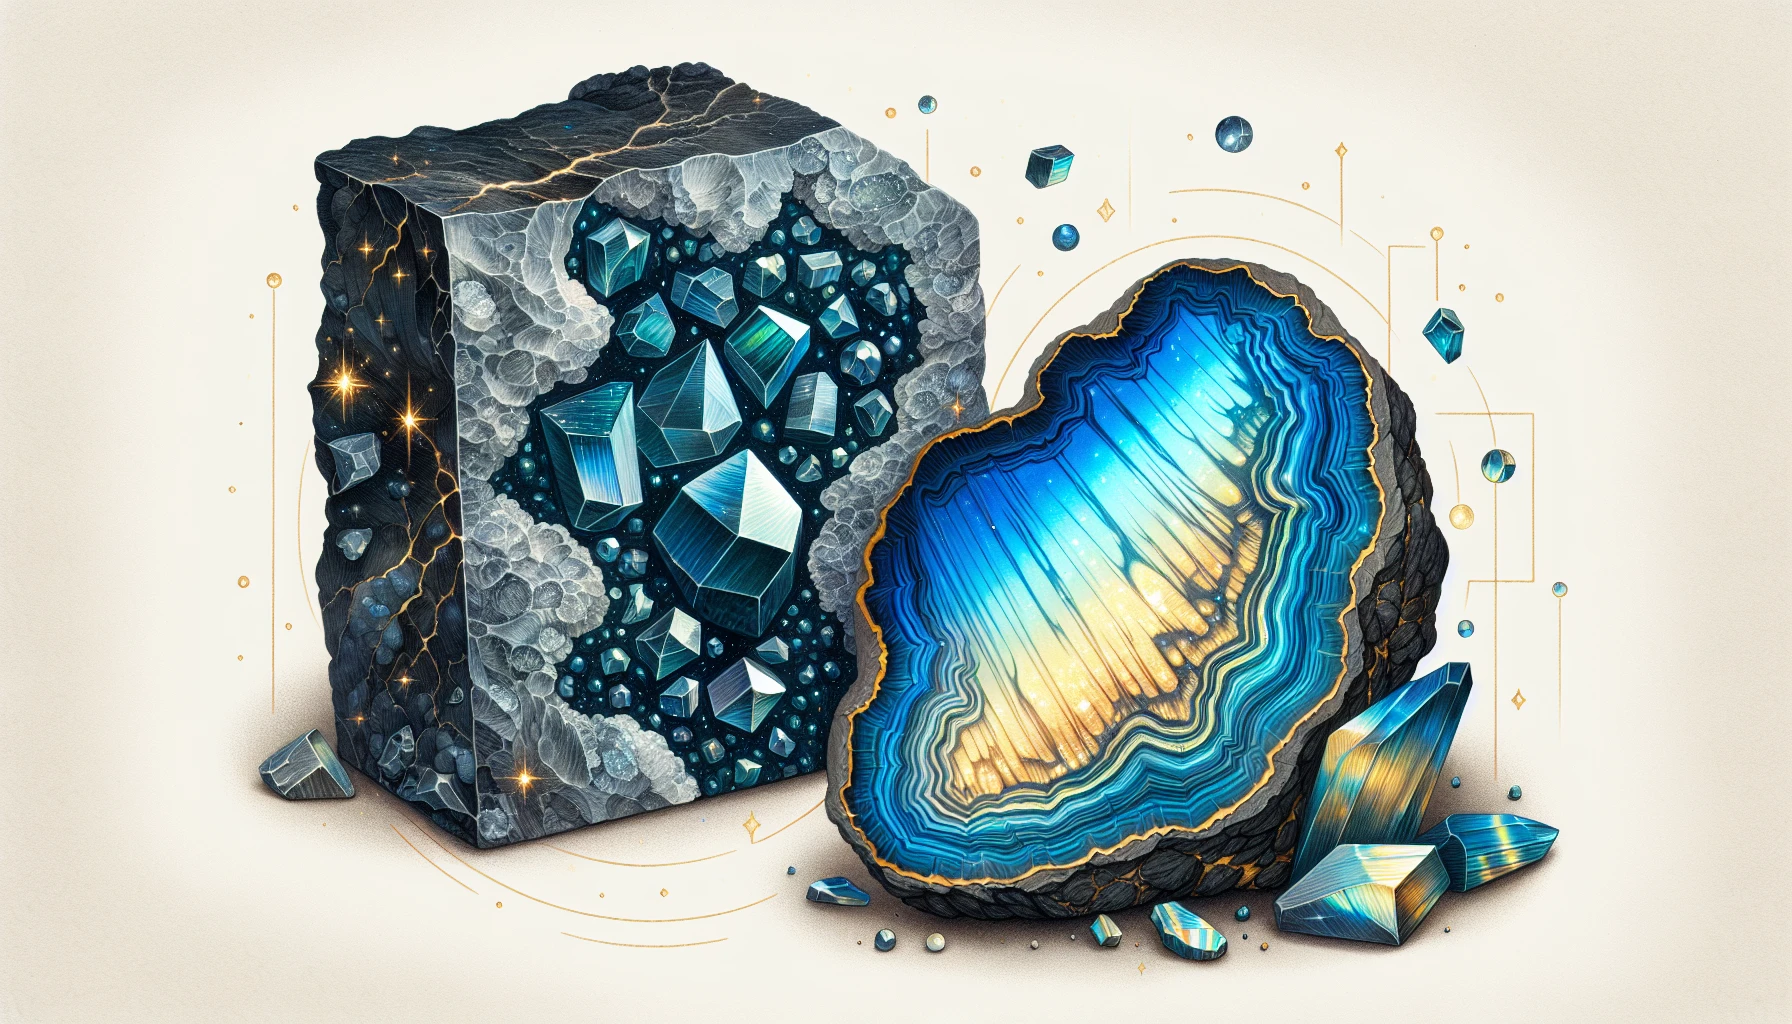 Contrasting features of larvikite and labradorite including differences in color, luster, mineral composition, and formation processes